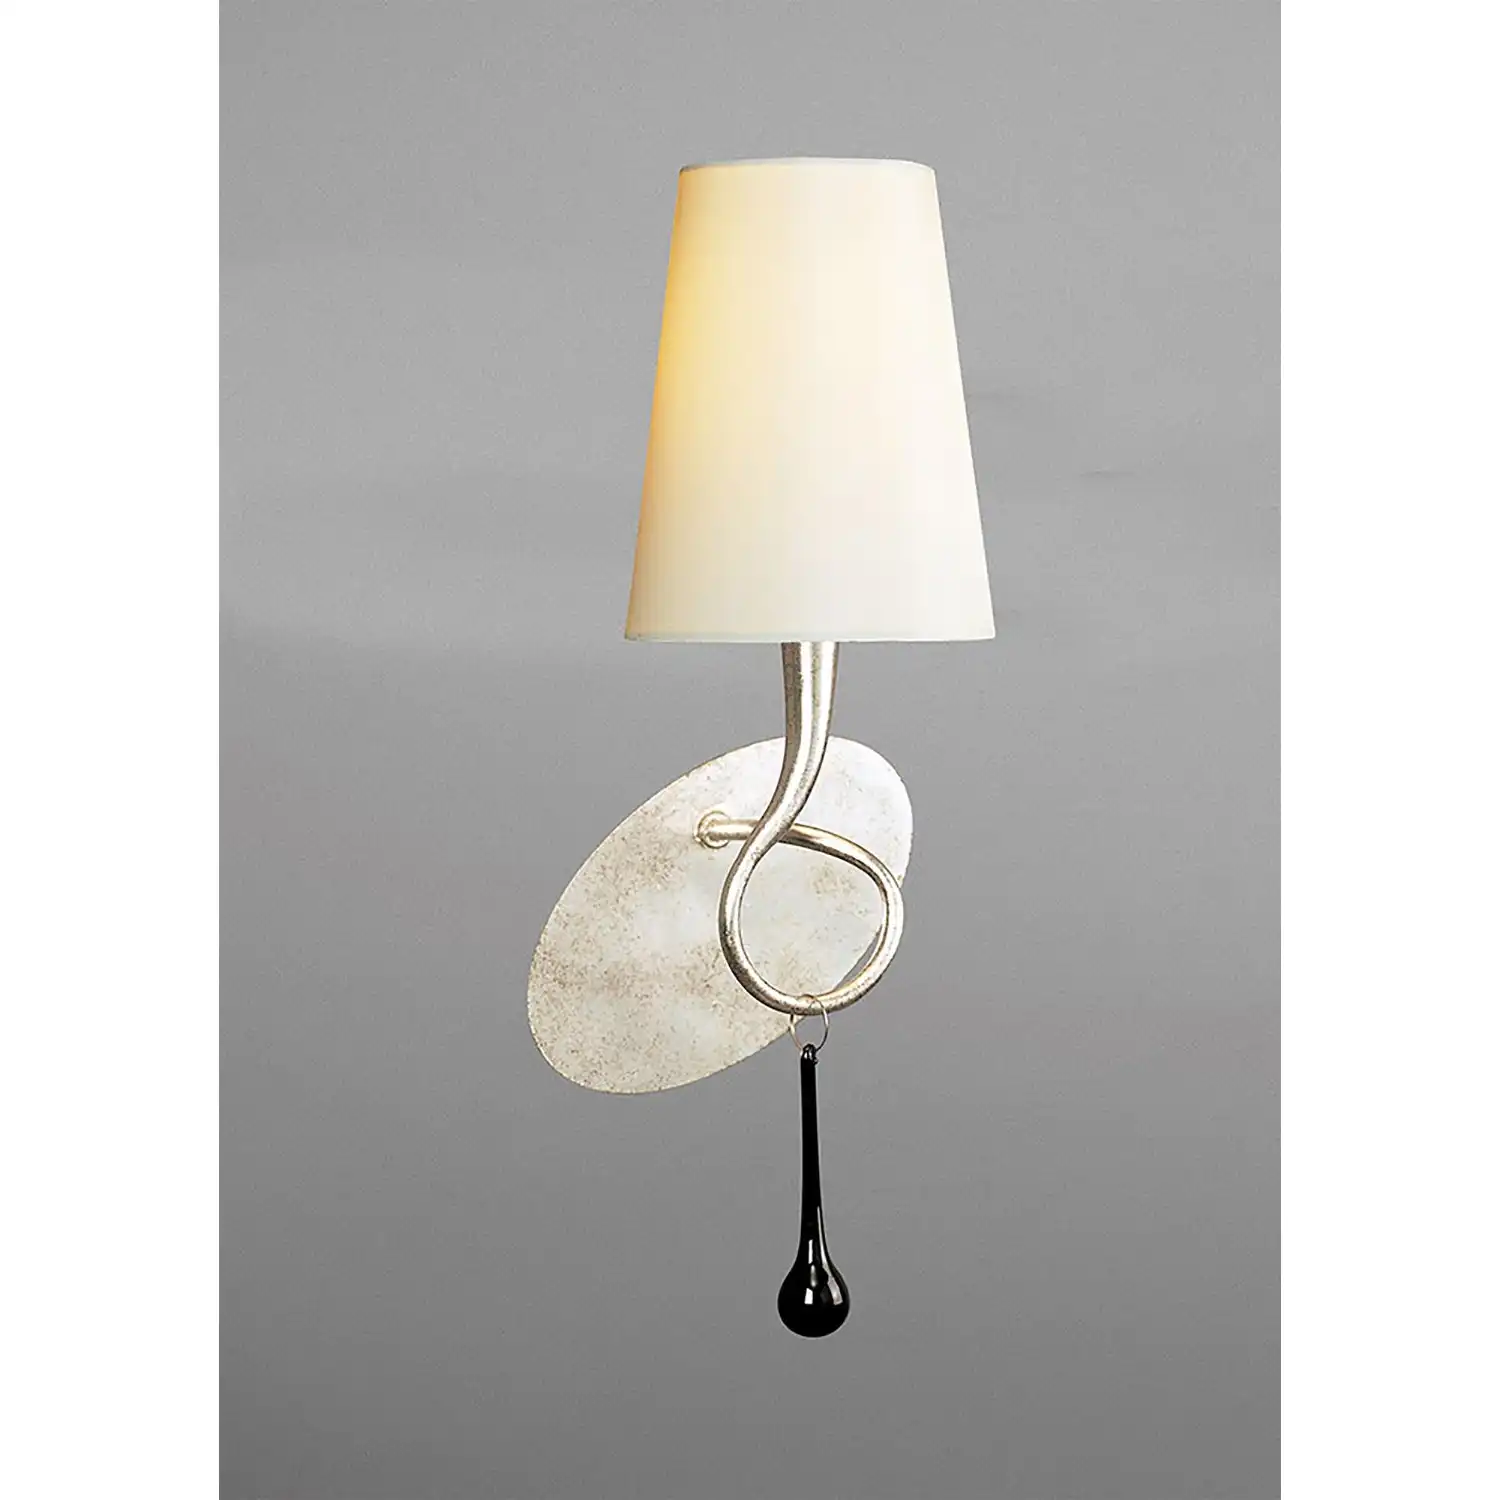 Paola Wall Lamp Switched 1 Light E14, Silver Painted With Cream Shade And Black Glass Droplets